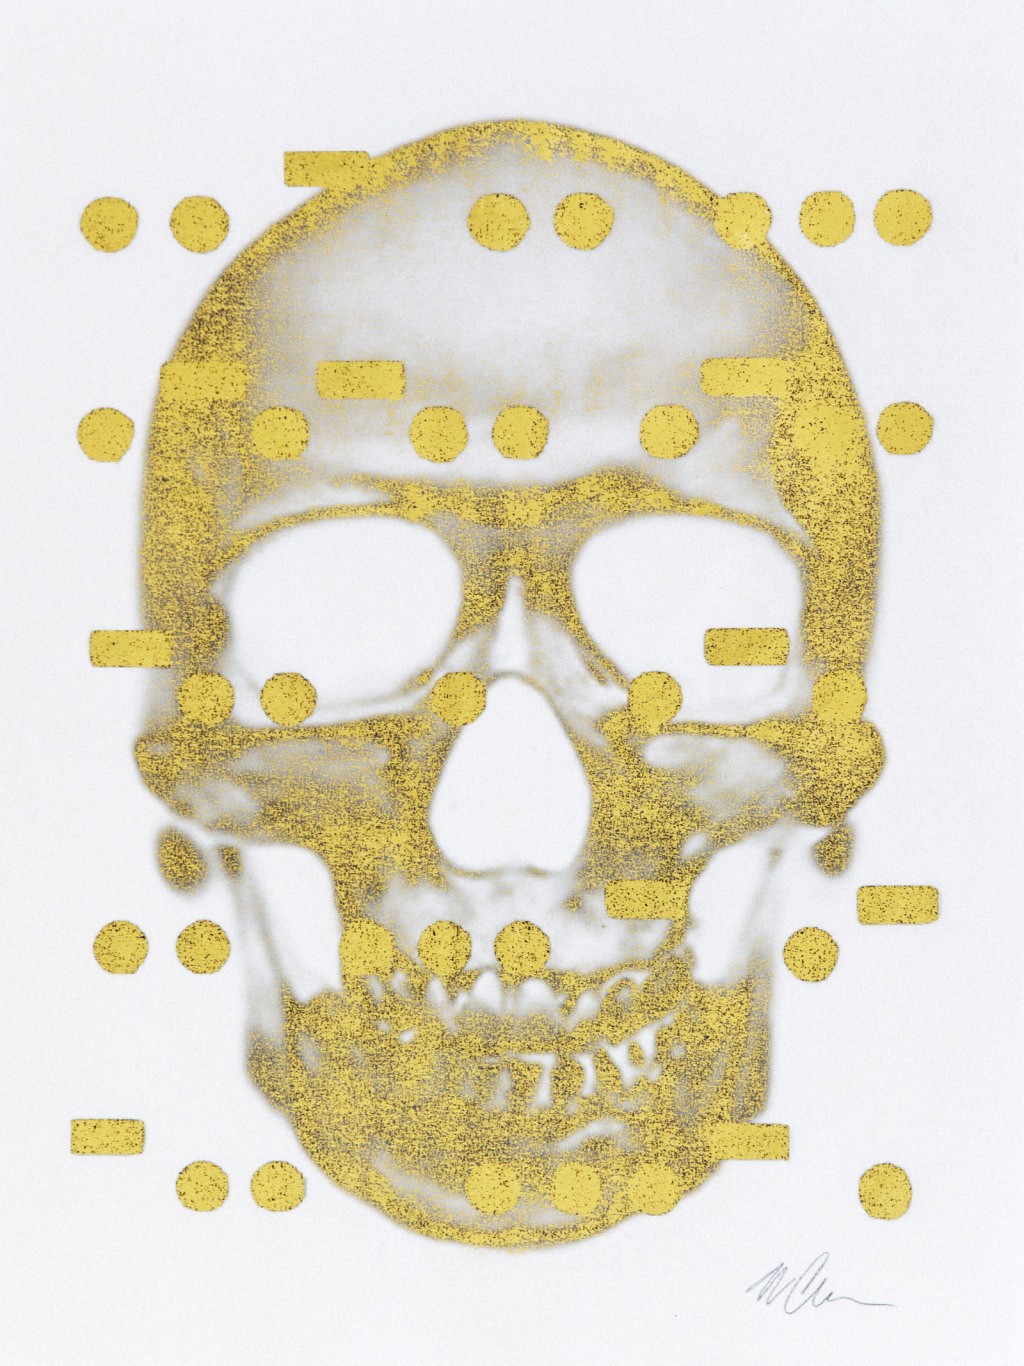 It's All Derivative: The Skull in Gold, Negative, 2012 is available on Artspace